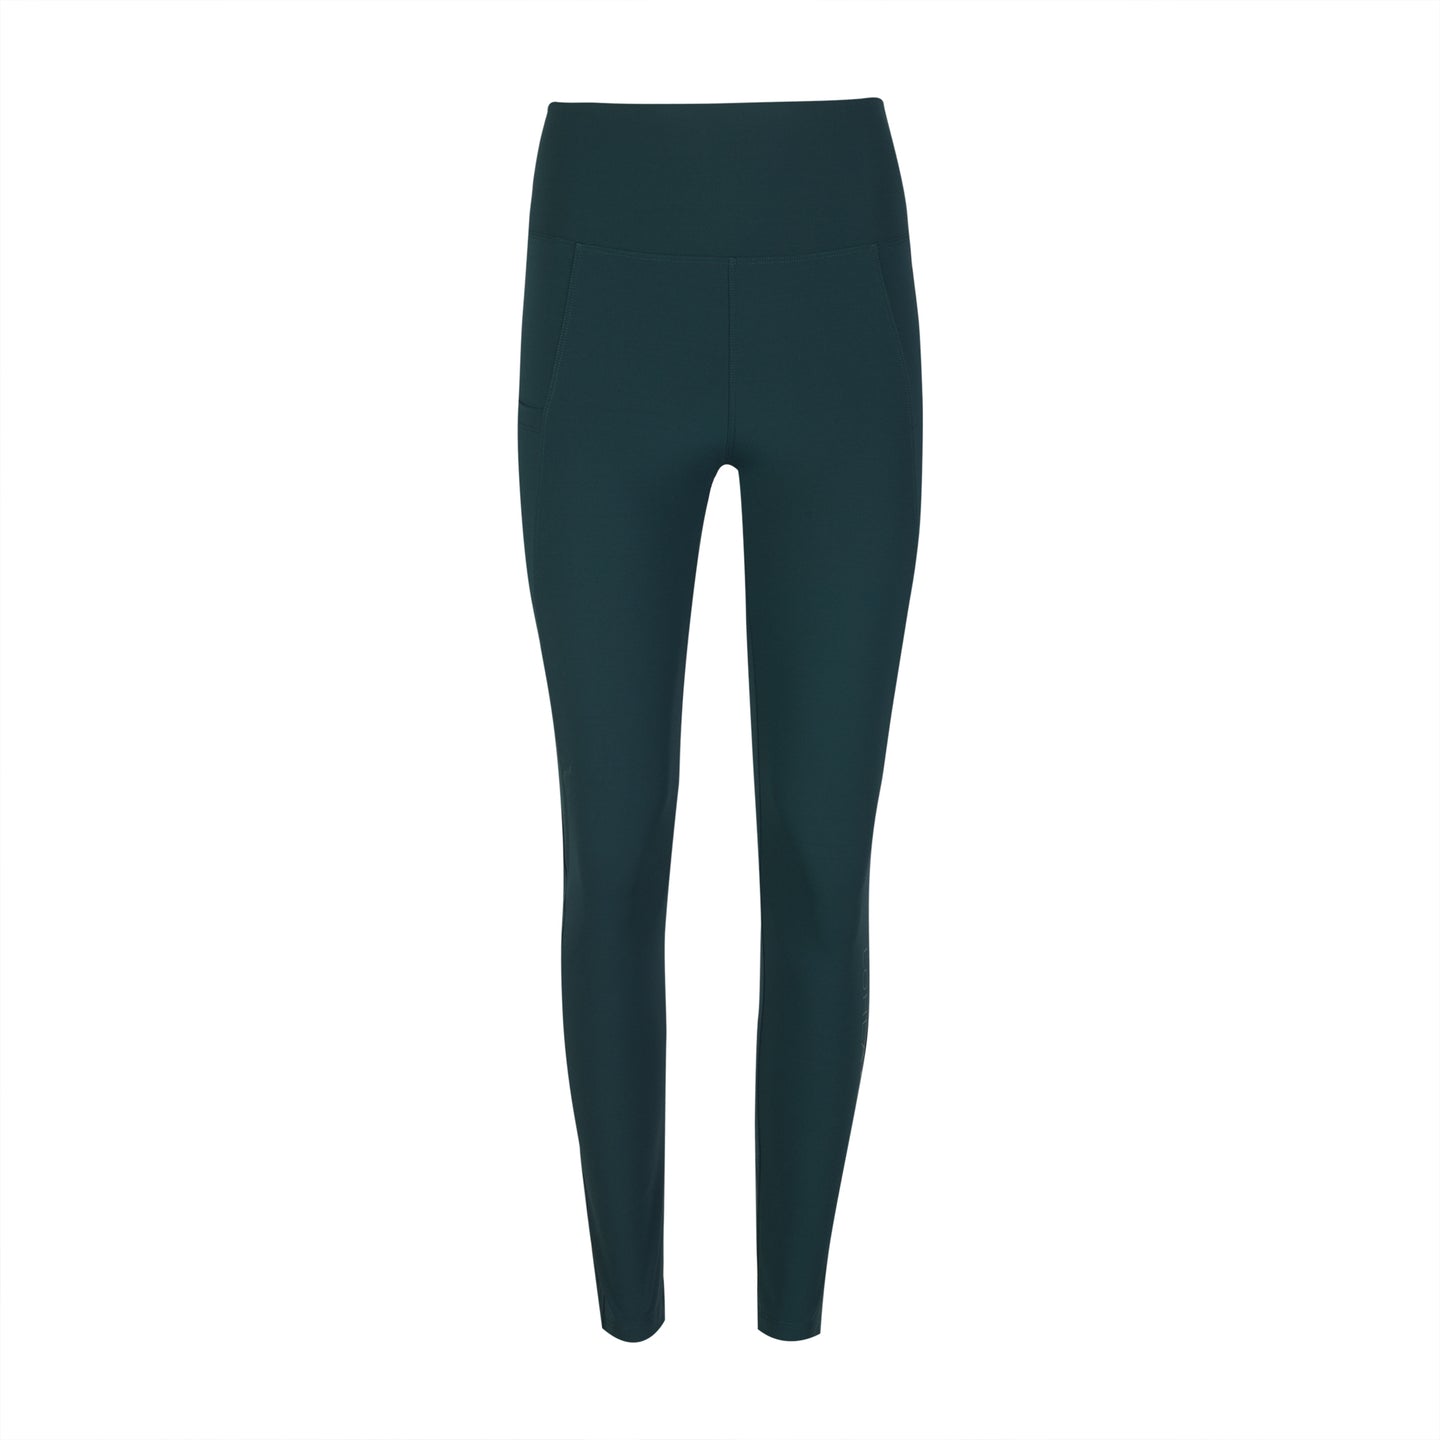 The Golf Fitness Pull-On Pant